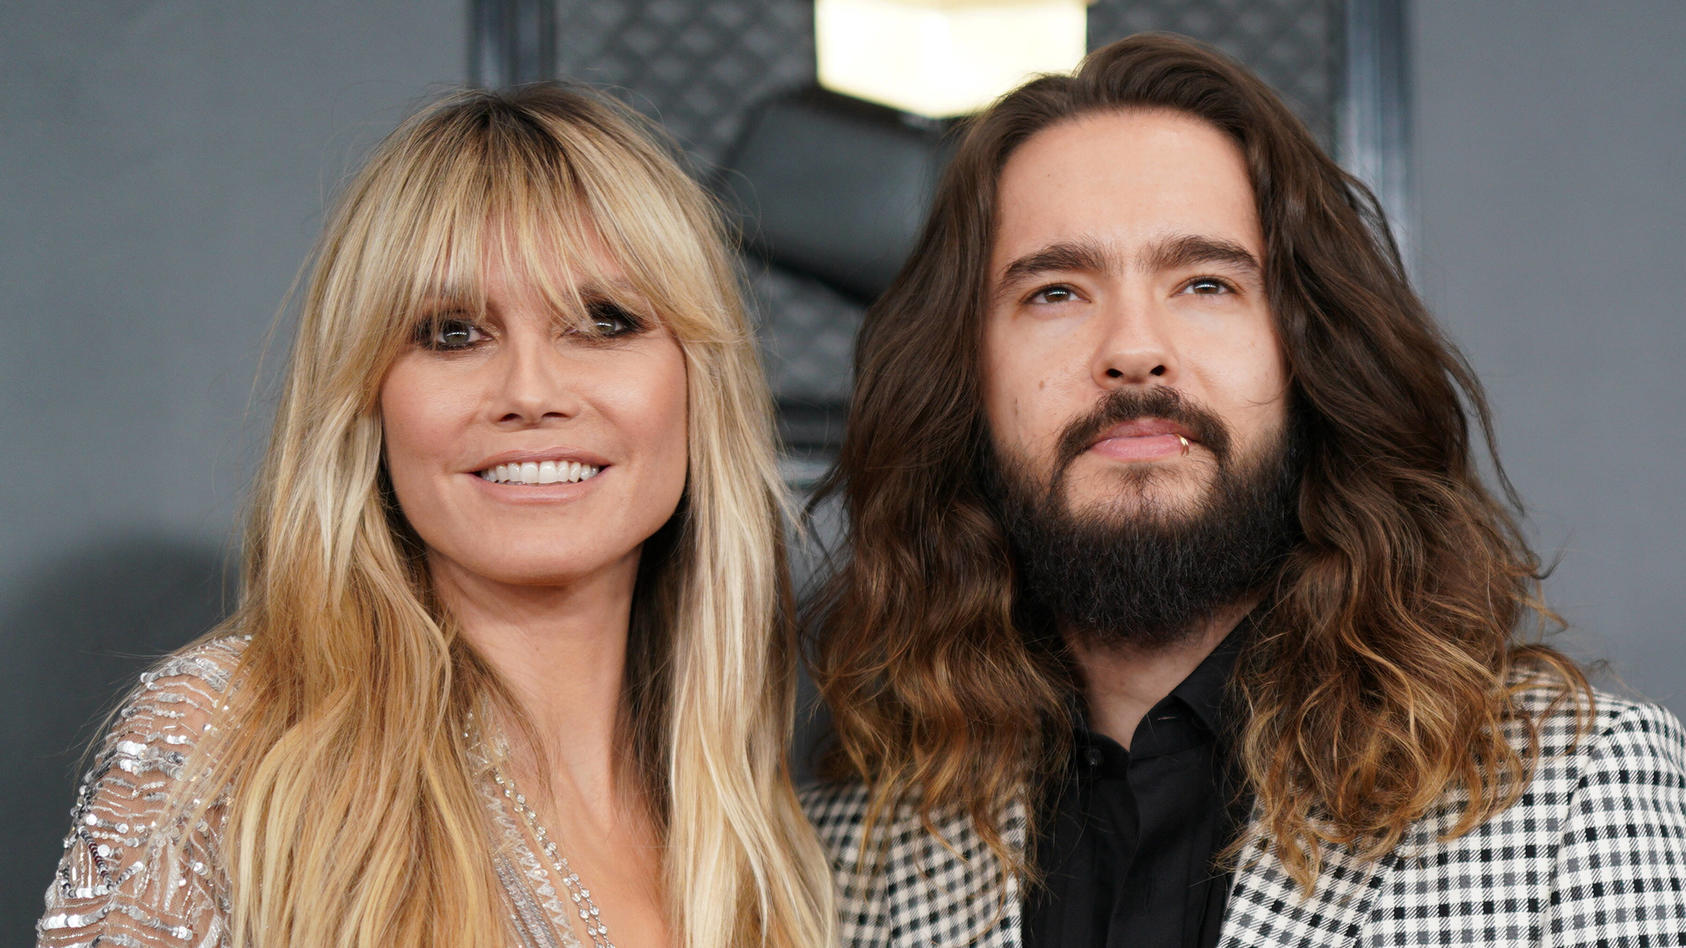 62nd Annual GRAMMY Awards held at The Staples Center - Arrivals Featuring: Heidi Klum, Tom Kaulitz Where: Los Angeles, California, United States When: 26 Jan 2020 Credit: CF/Cover Images PUBLICATIONxNOTxINxUKxFRA Copyright: xx 40227227